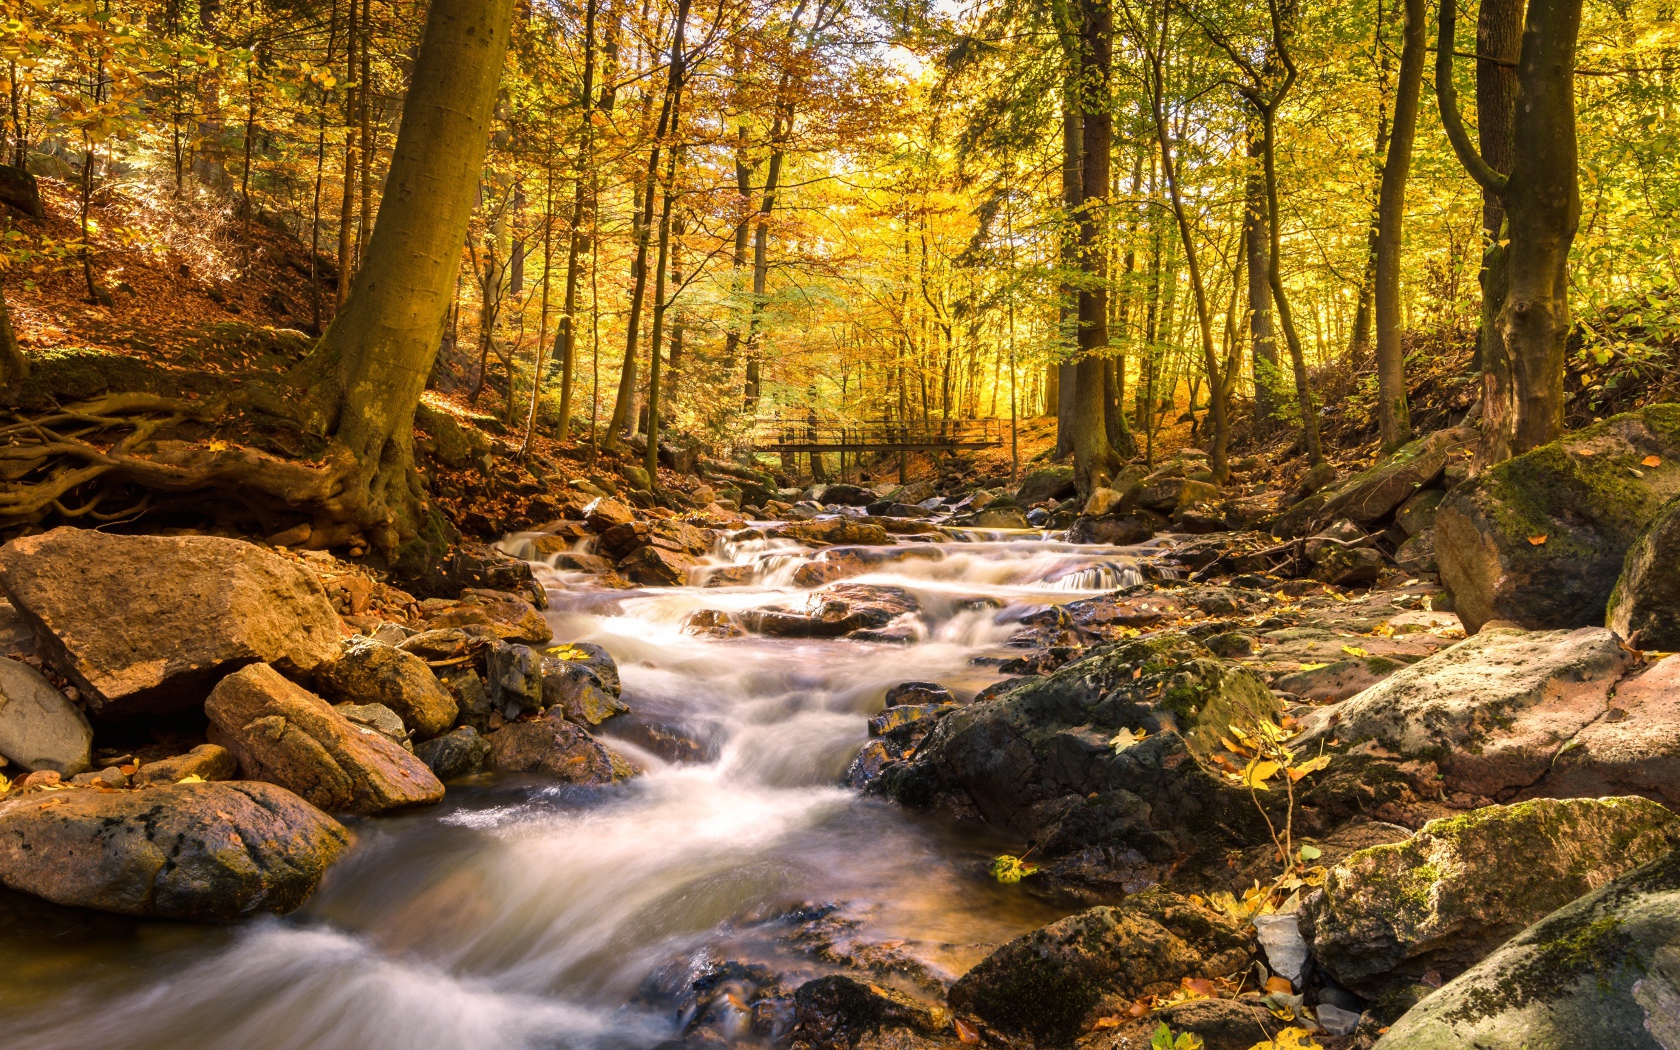 Rapid creek water flows down stones in autumn forest